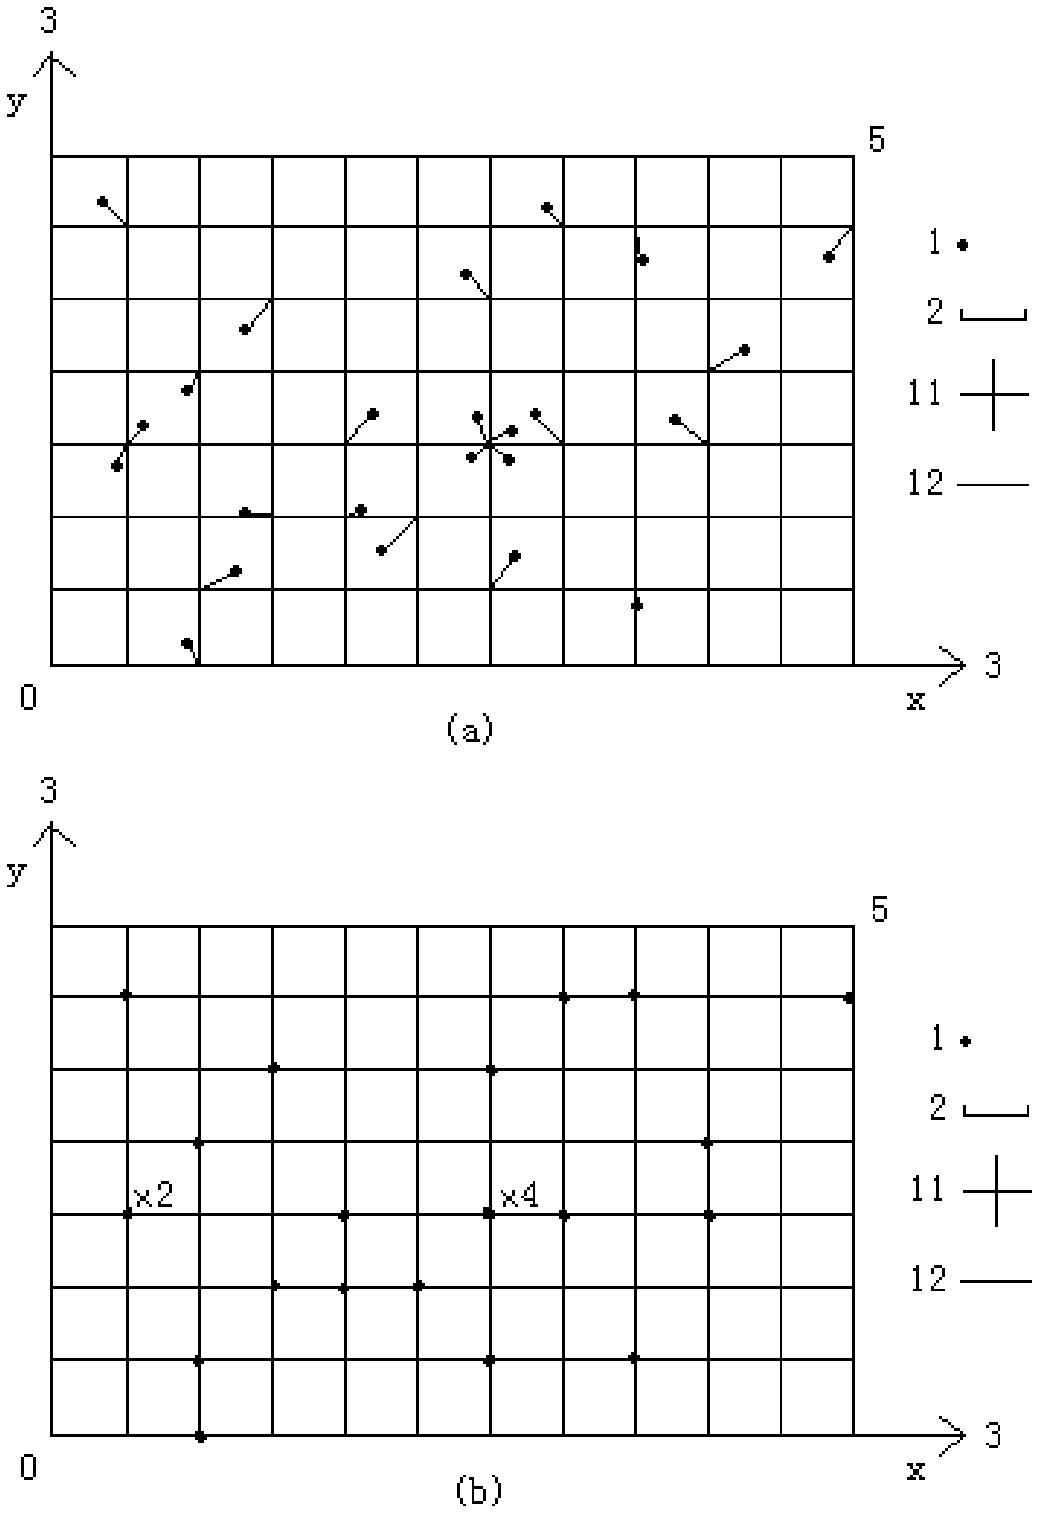 Grid optimization method for through silicon via (TSV) positions in automatic layout of three-dimensional (3D) integrated circuit